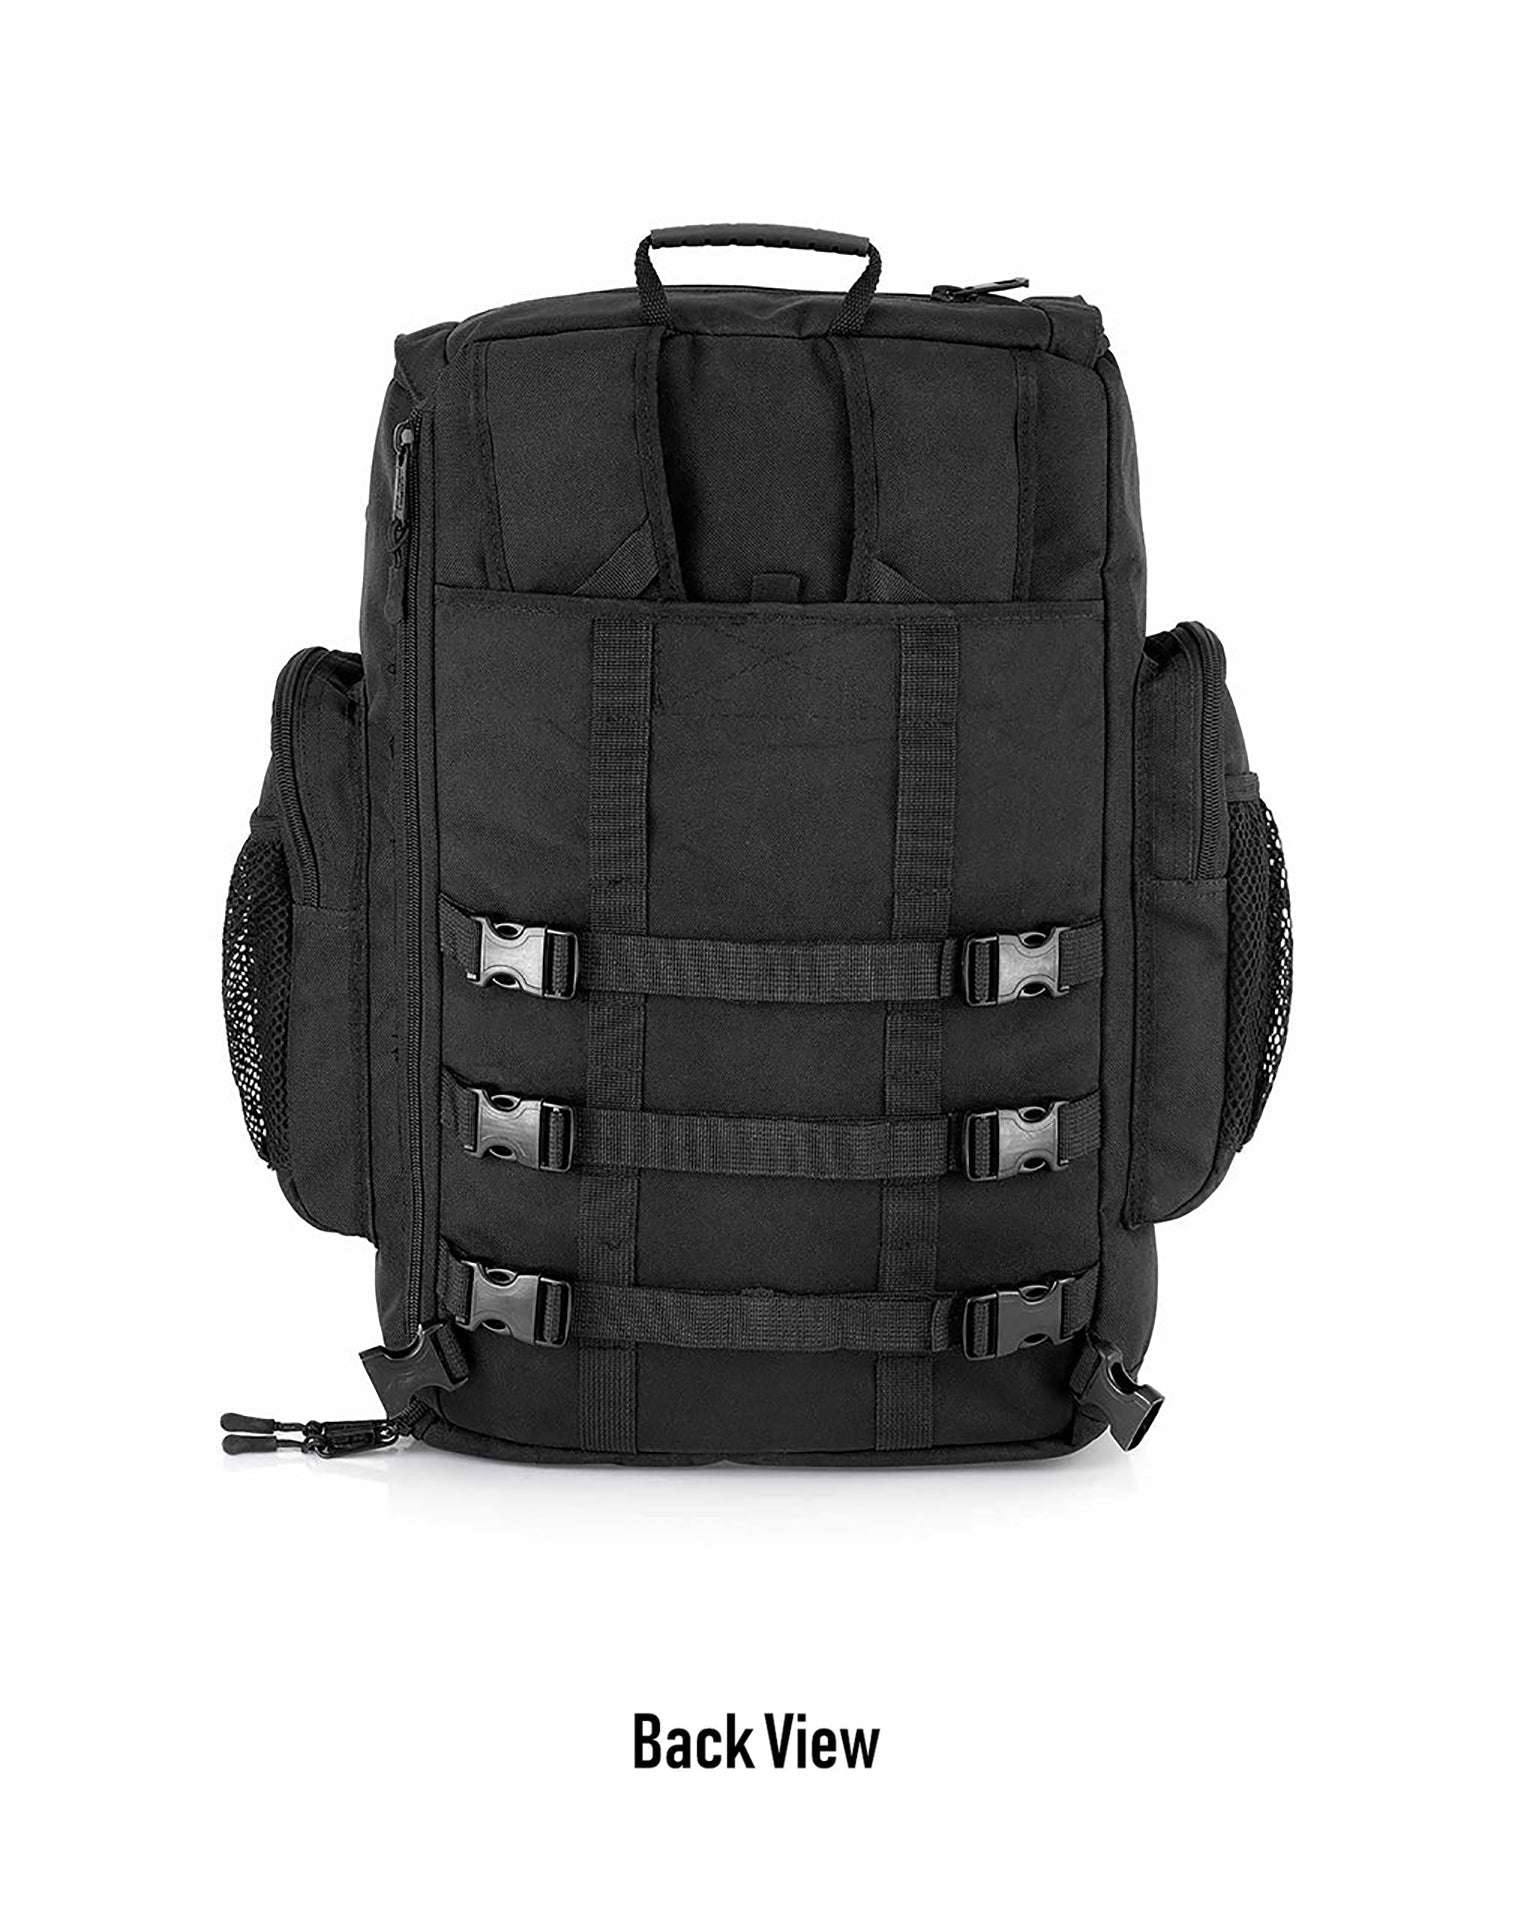 32L - Trident Large Triumph Motorcycle Backpack